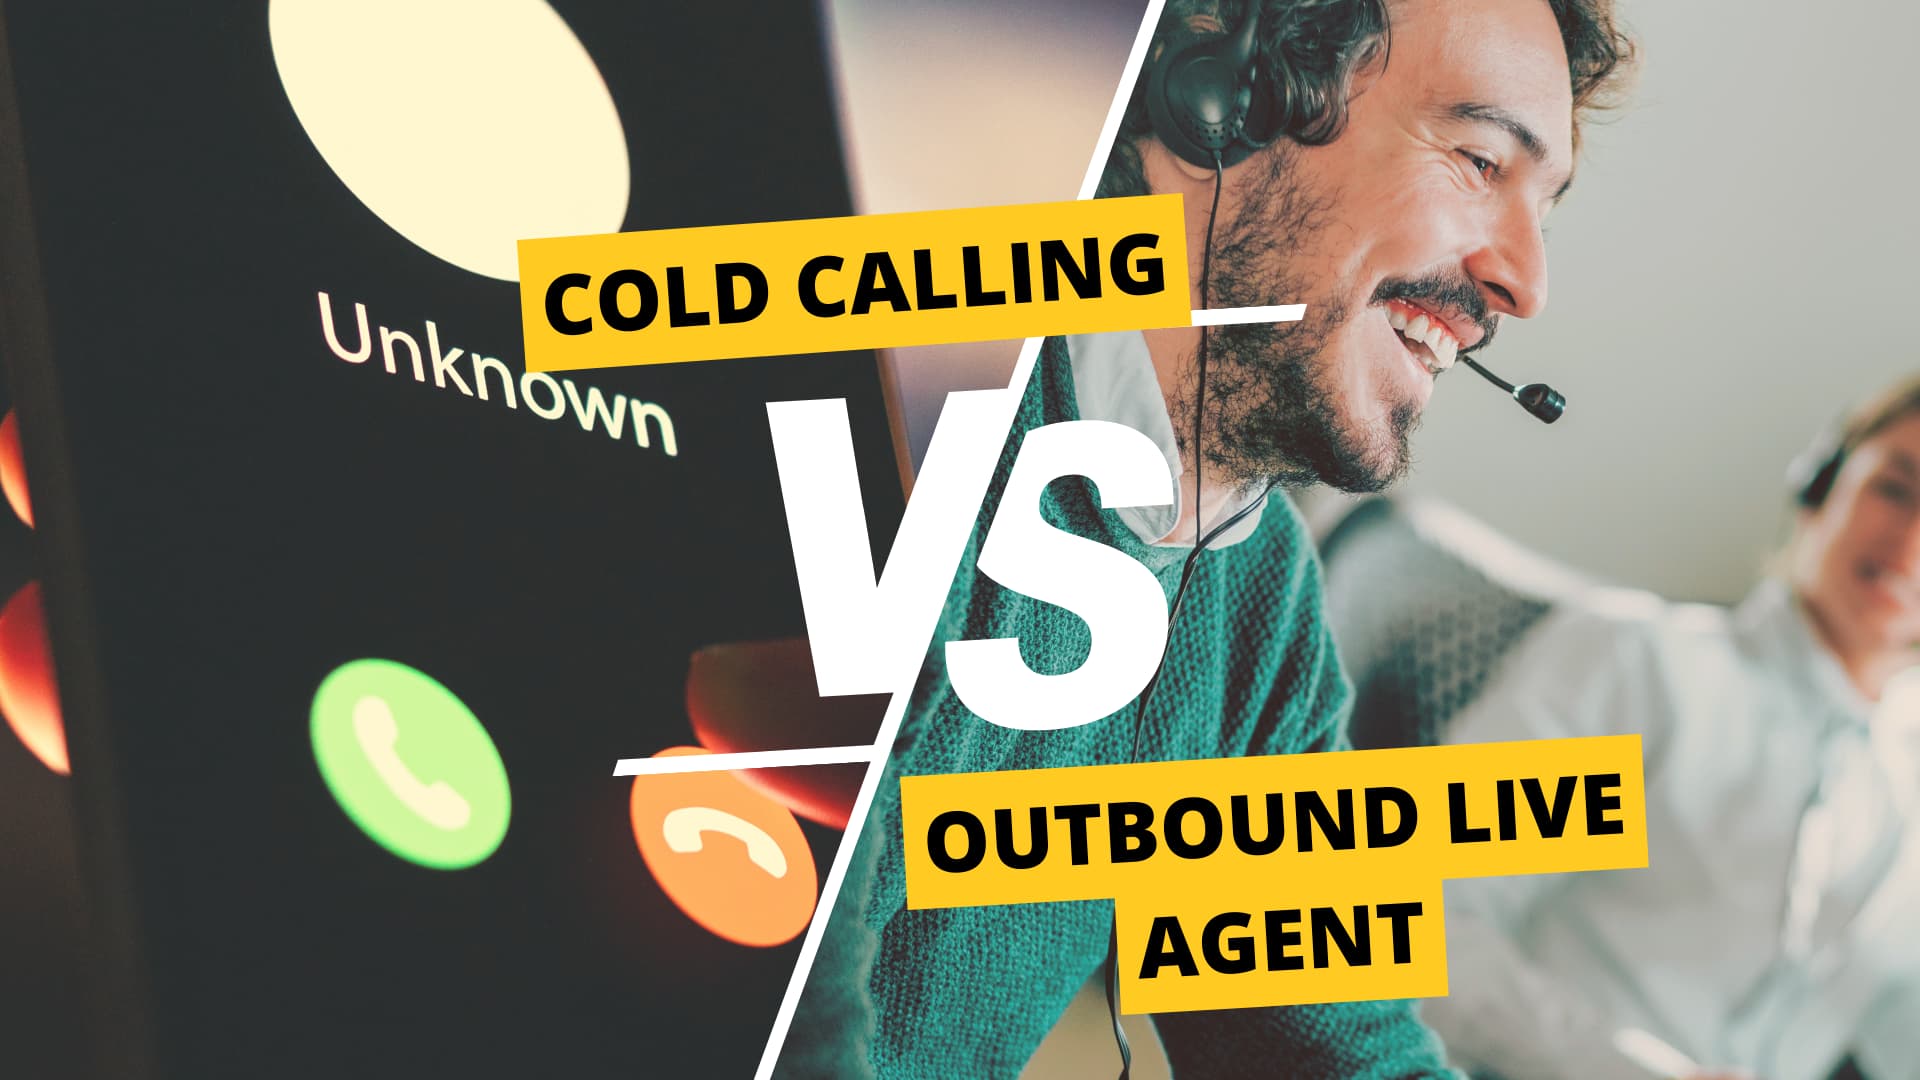 Cold Calling vs. Outbound Calling